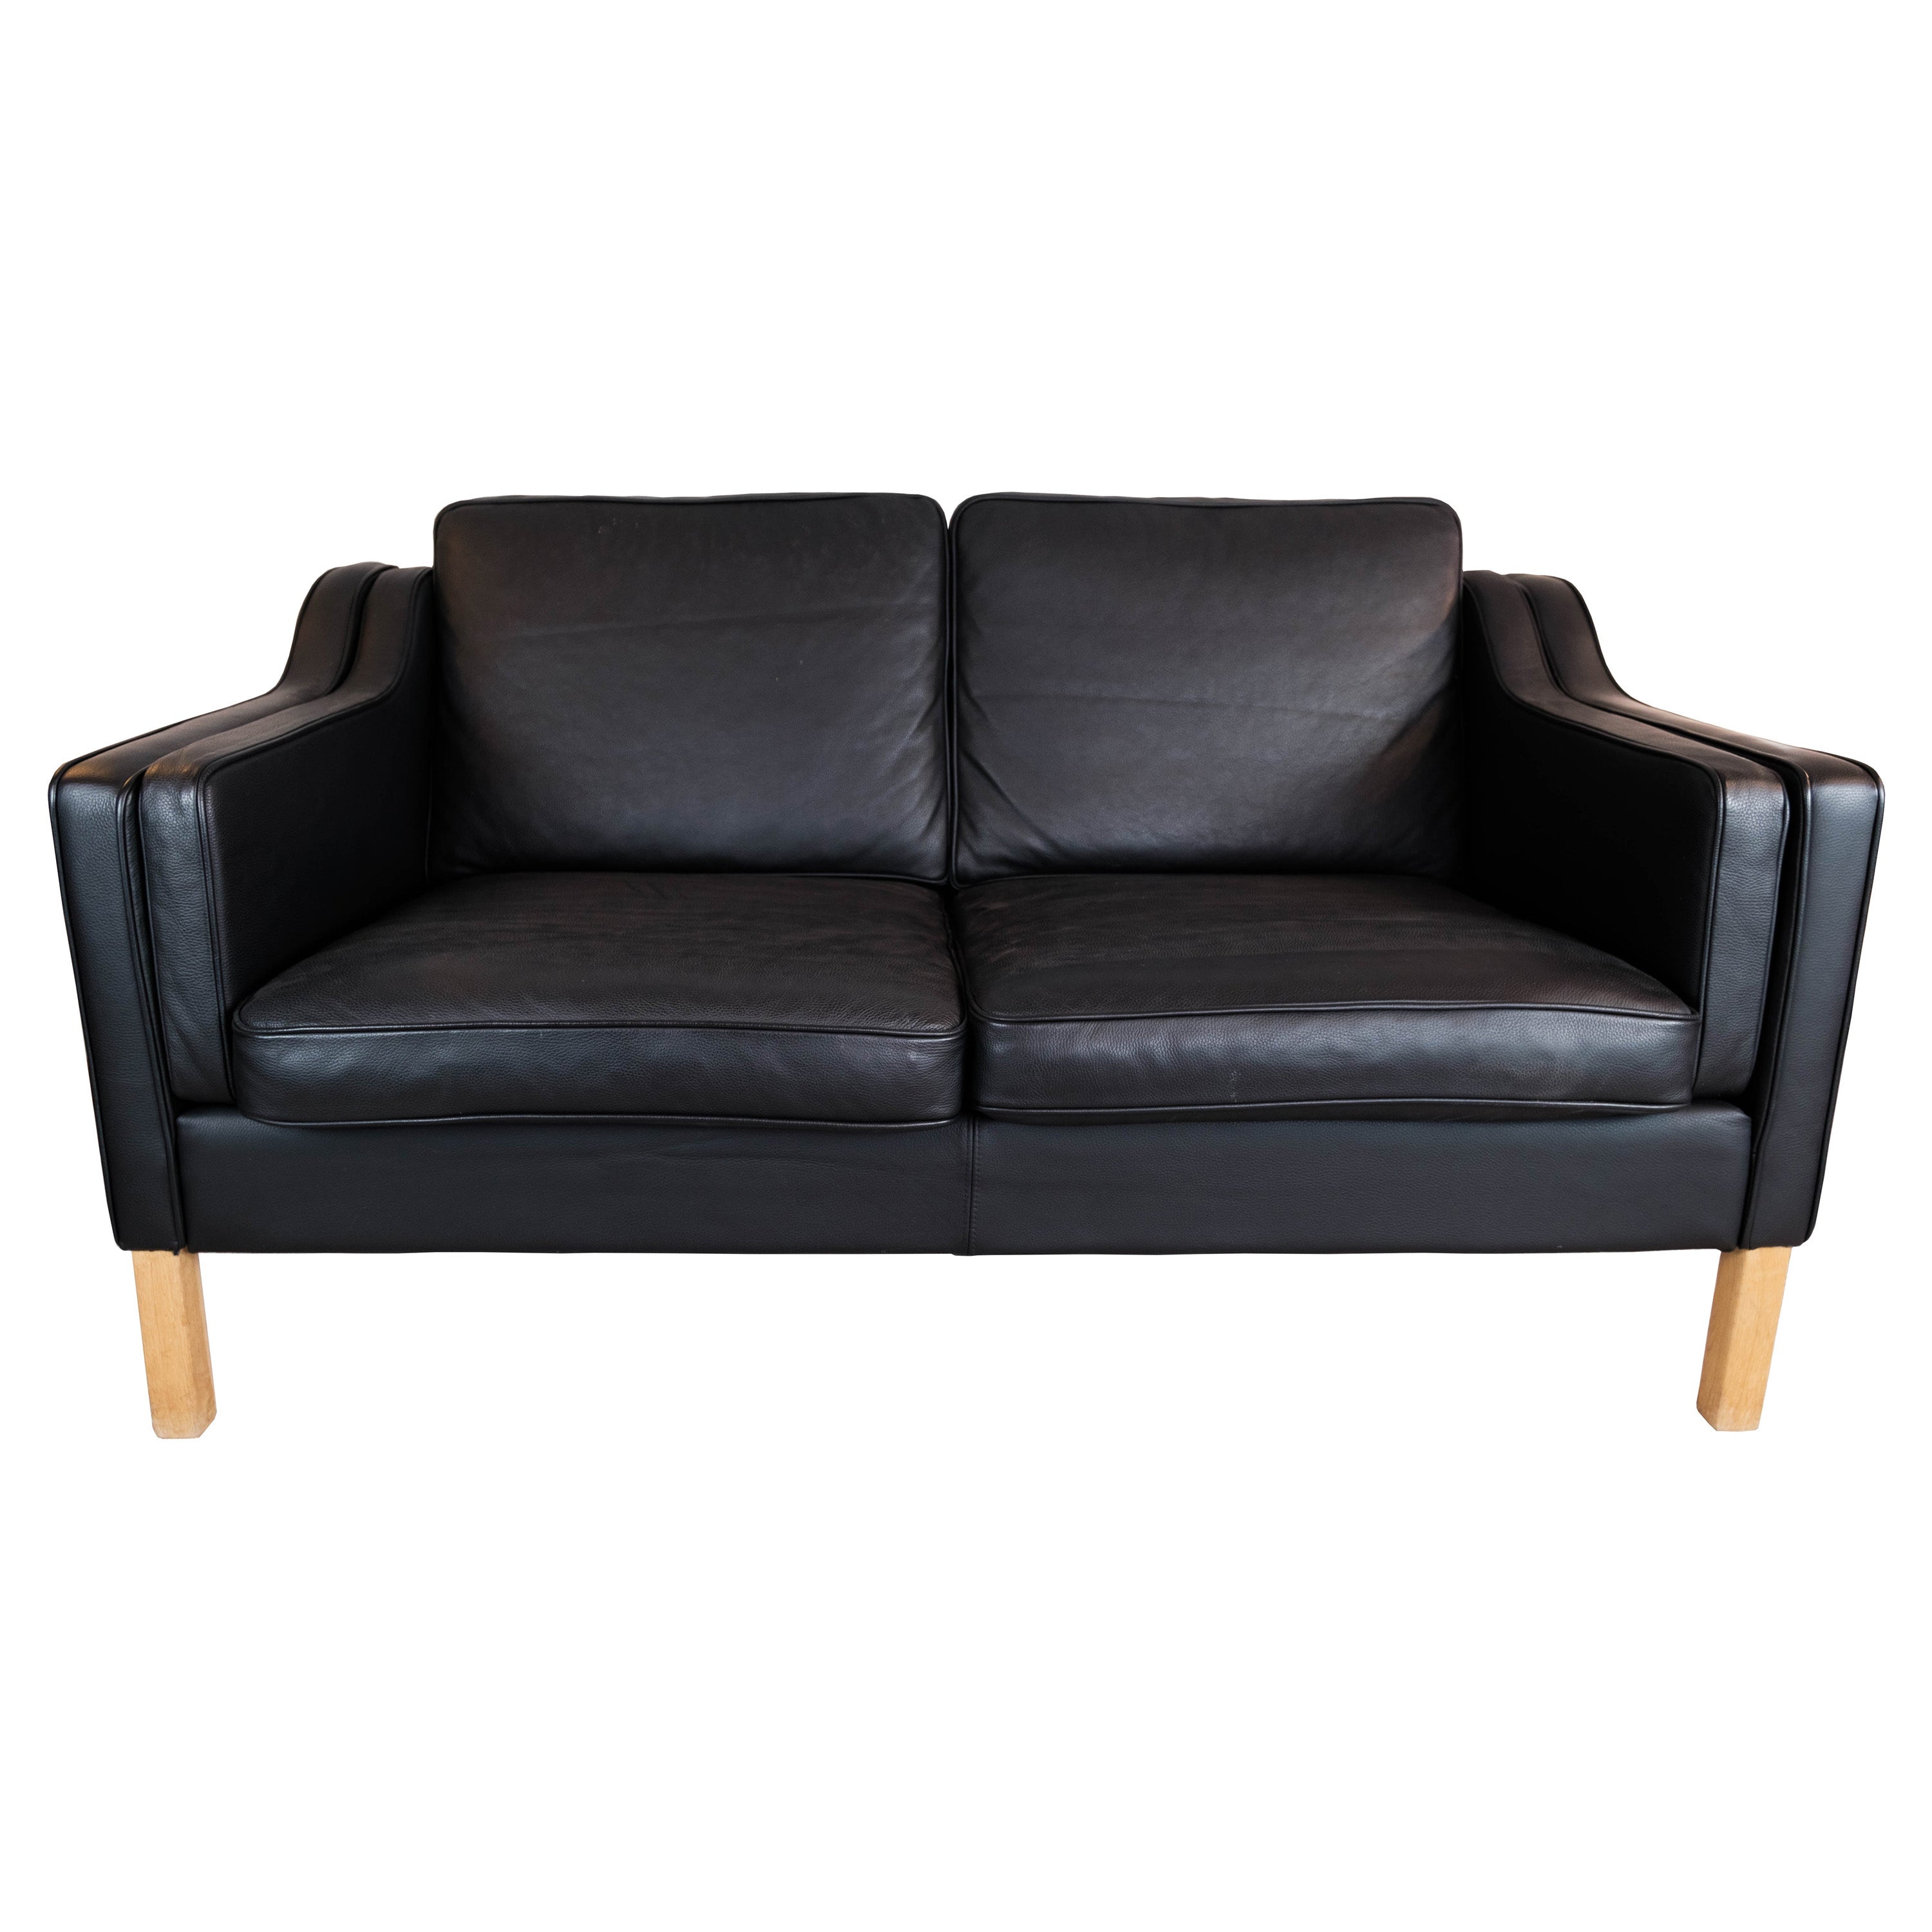 Black Leather 2 Seater Sofa with Legs of Oak, Manufactured by Stouby Furniture